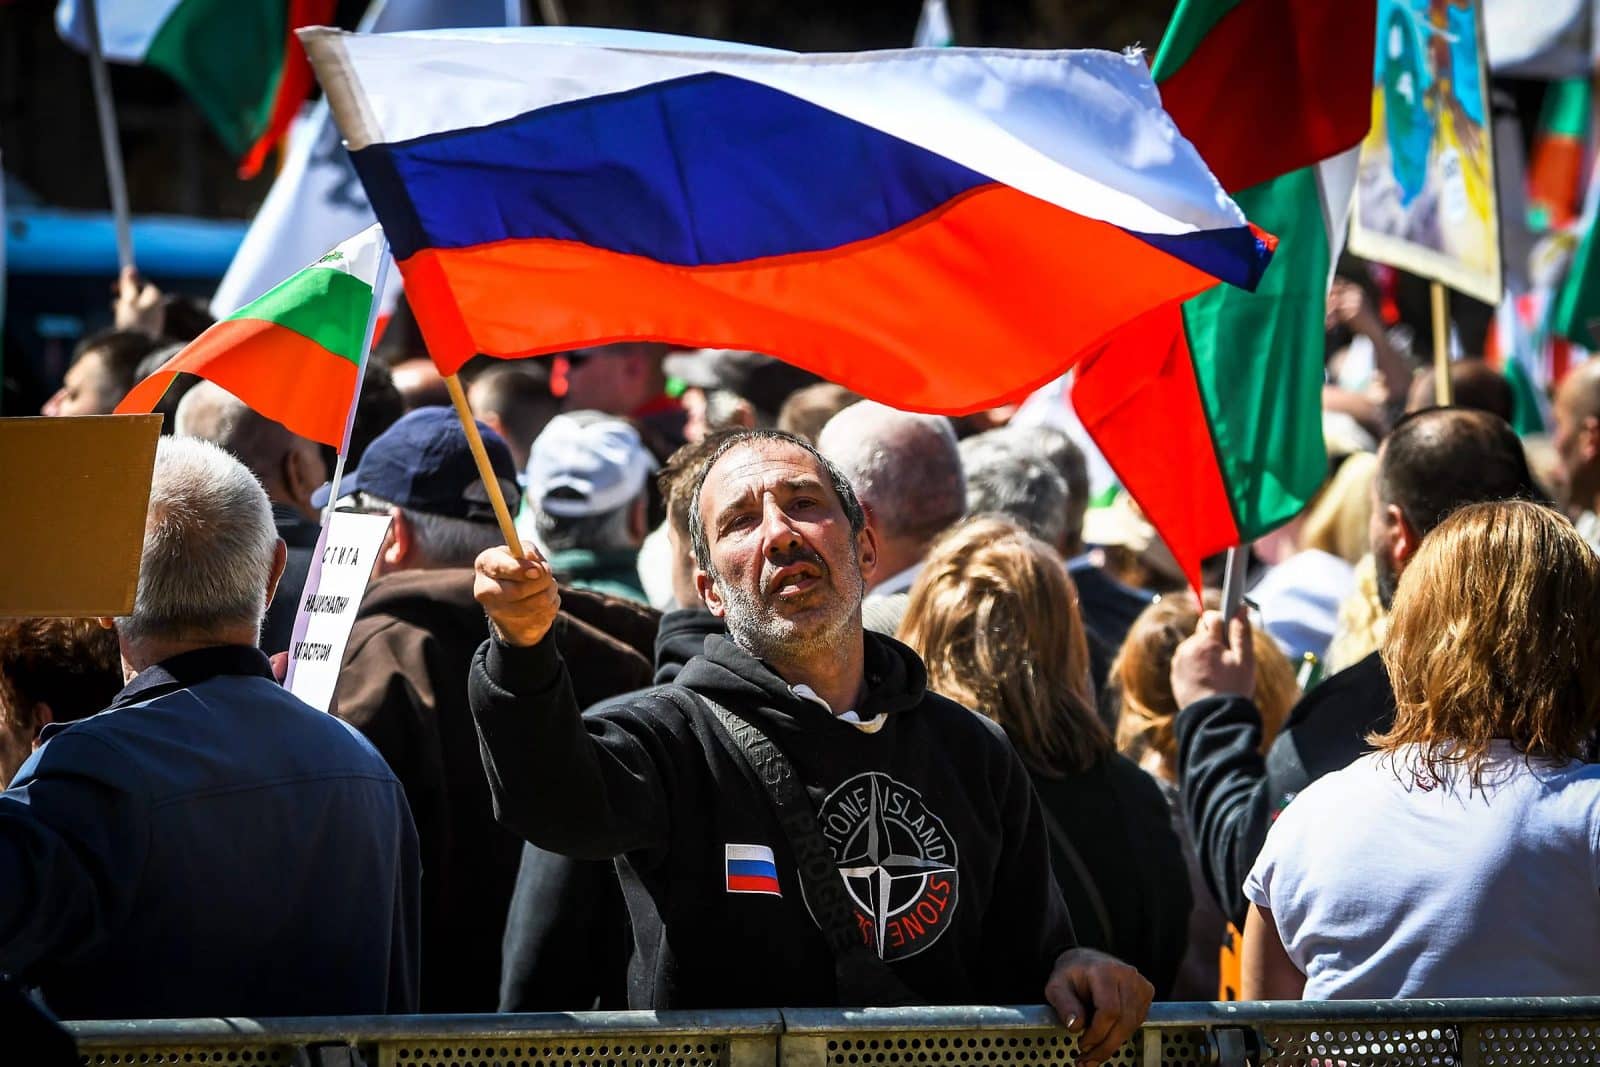 “Bulgaria for peace.” The Kremlin found a new job for “anti-vaxxers”